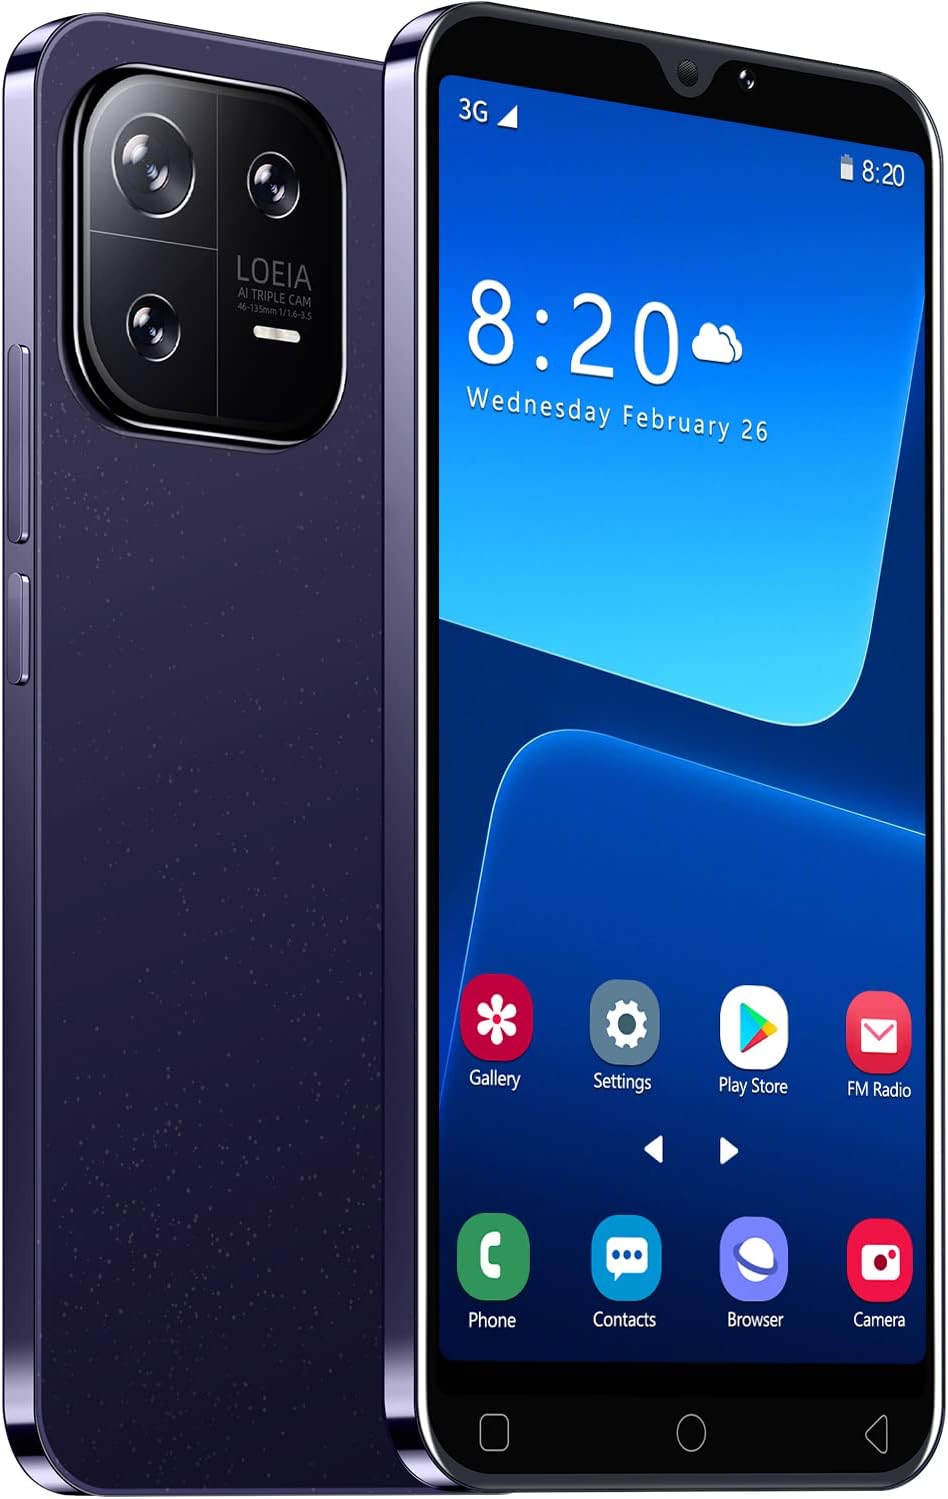 F2FTlk Cheap Mobile Phones，M13Pro 5.0“ Android 8.1 Smartphone, 16GB ROM(Extendable to 128GB,Dual SIM Dual Camera, WiFi,Bluetooth,GPS Basic Cell Phones (M13Pro-Blue)